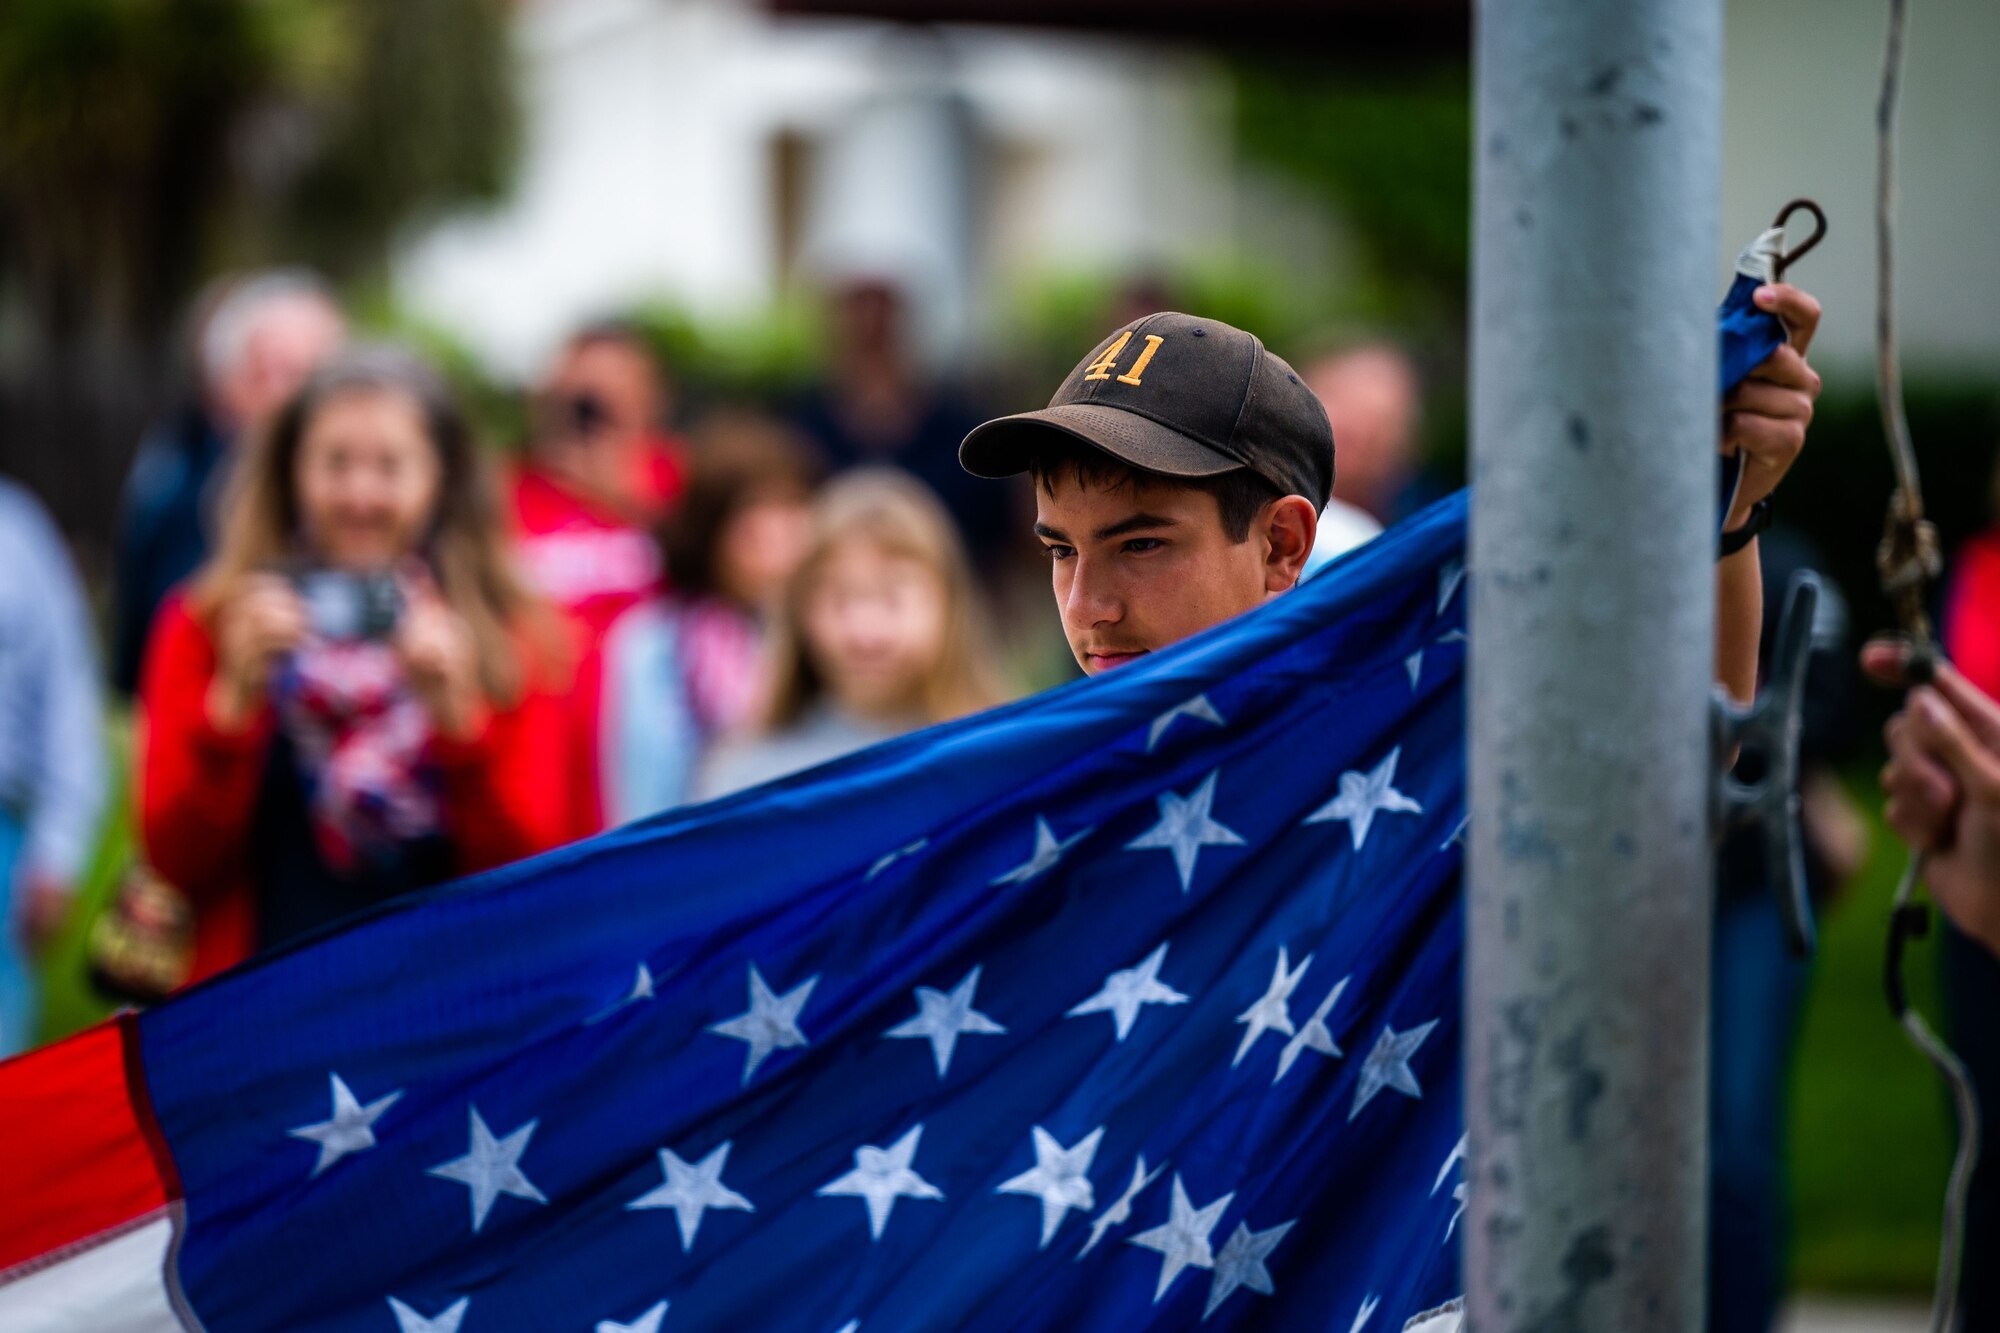 A member of a local scouts group particpates in the raising of the American flag during a Memorial Day ceremony at the Solvang Veterans Memorial Hall in Solvang, Calif., May 29, 2023. U.S. Space Force Maj. Gen. Douglas A. Schiess, Combined Force Space Component Command commander, gave the keynote speech to over 200 attendees that included veterans from the Global War on Terrorism, Vietnam, Korea and even one veteran from WWII. The ceremony also included the raising on the American Flag by a local Cub Scouts group and a laying of a wreath with a Gold Star family member. (U.S. Space Force photo by Tech. Sgt. Luke Kitterman)